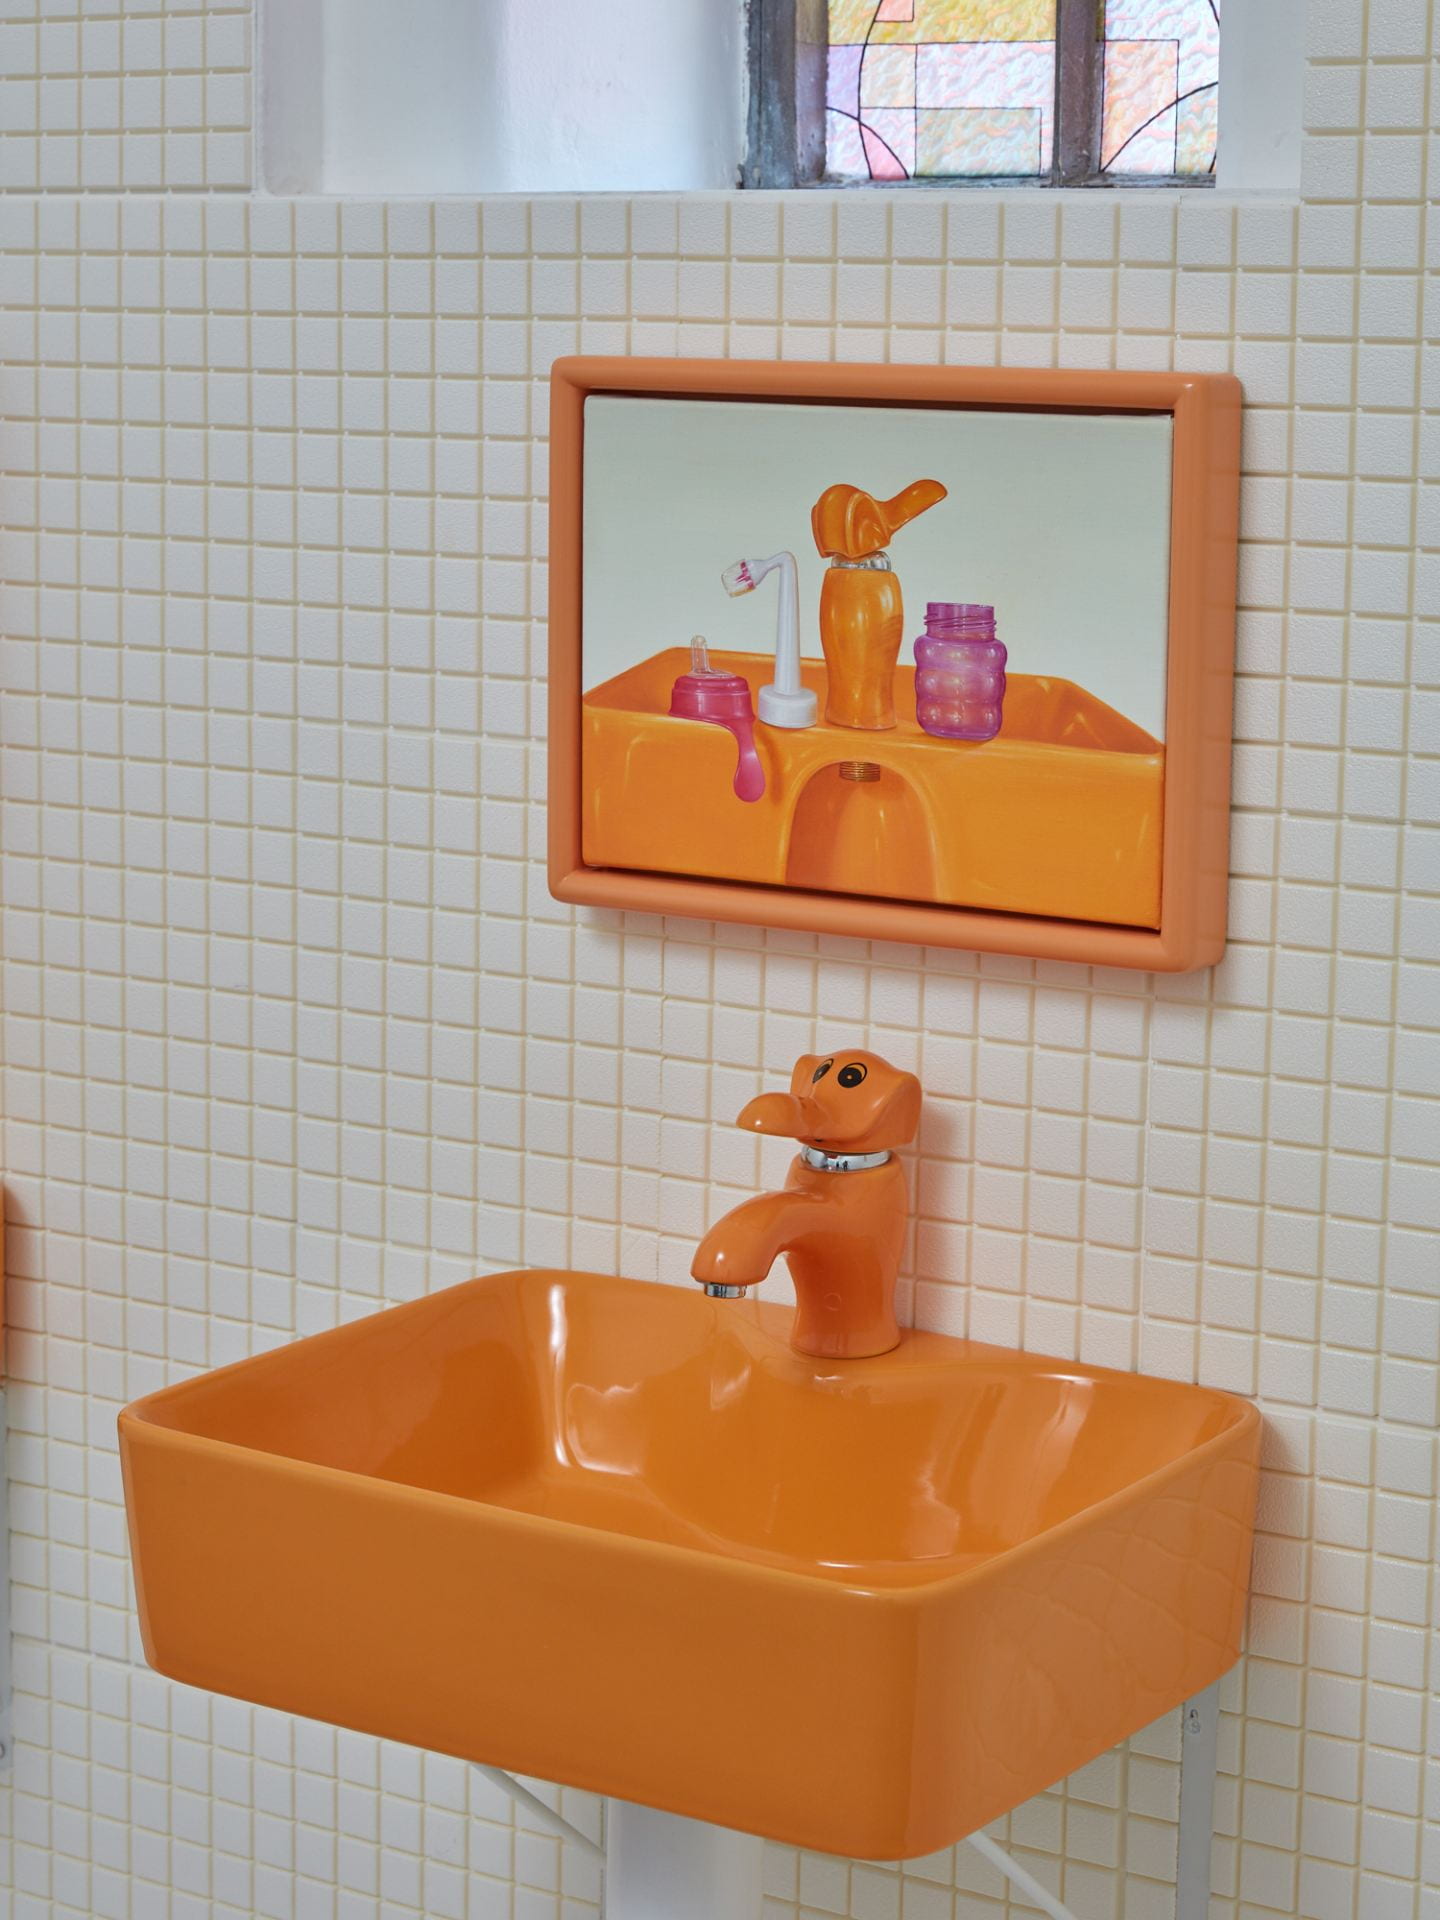 An orange sink with an elephant shaped tap installed on a white tiled wall. Above the sink is a small painting of the sink itself.